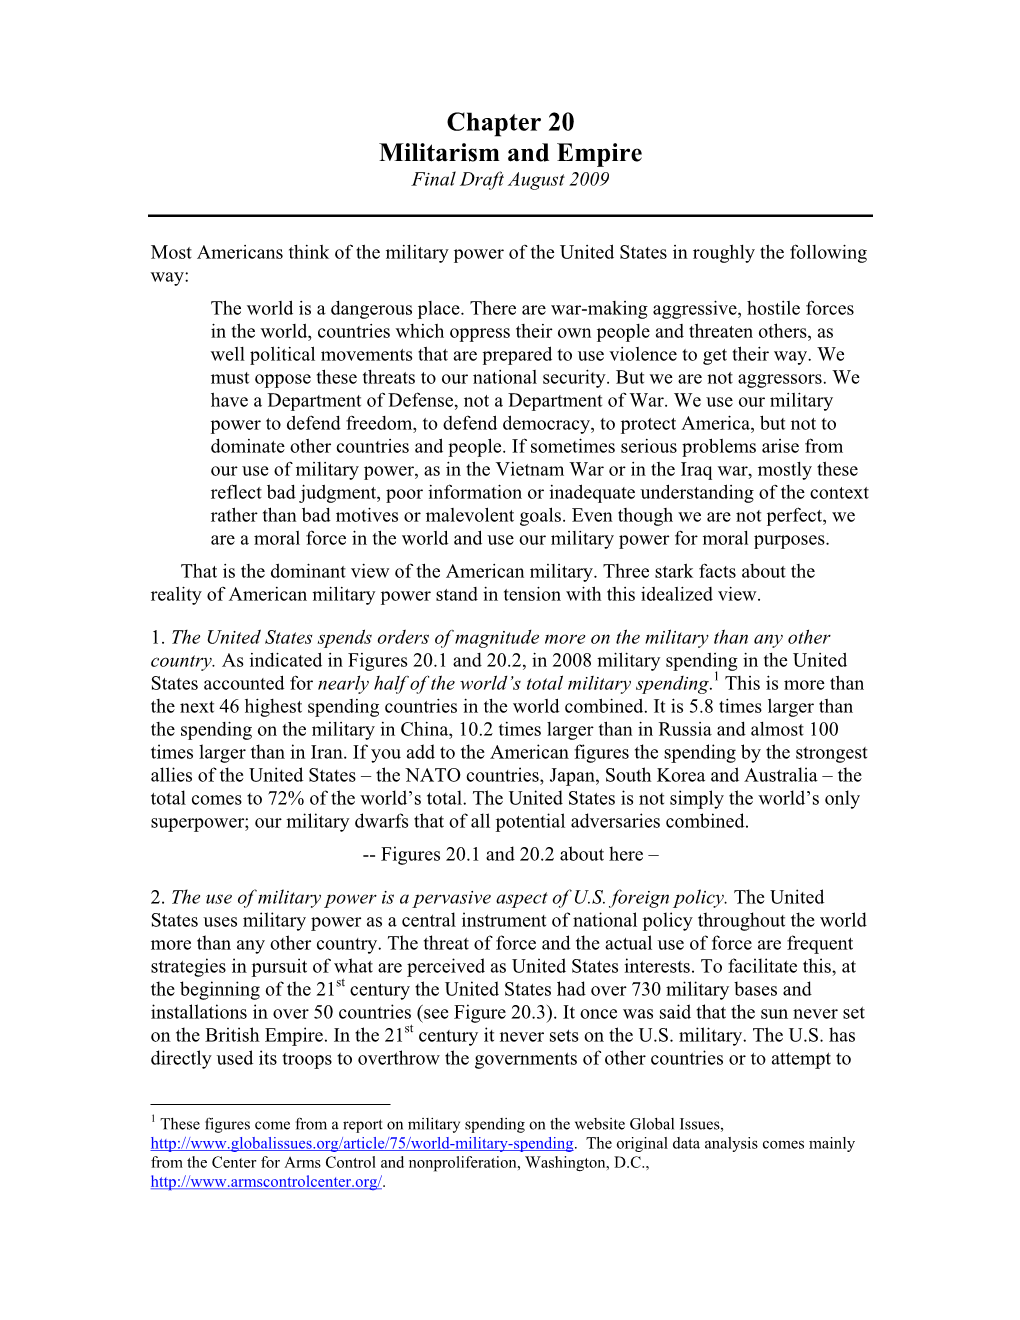 Chapter 20 Militarism and Empire Final Draft August 2009